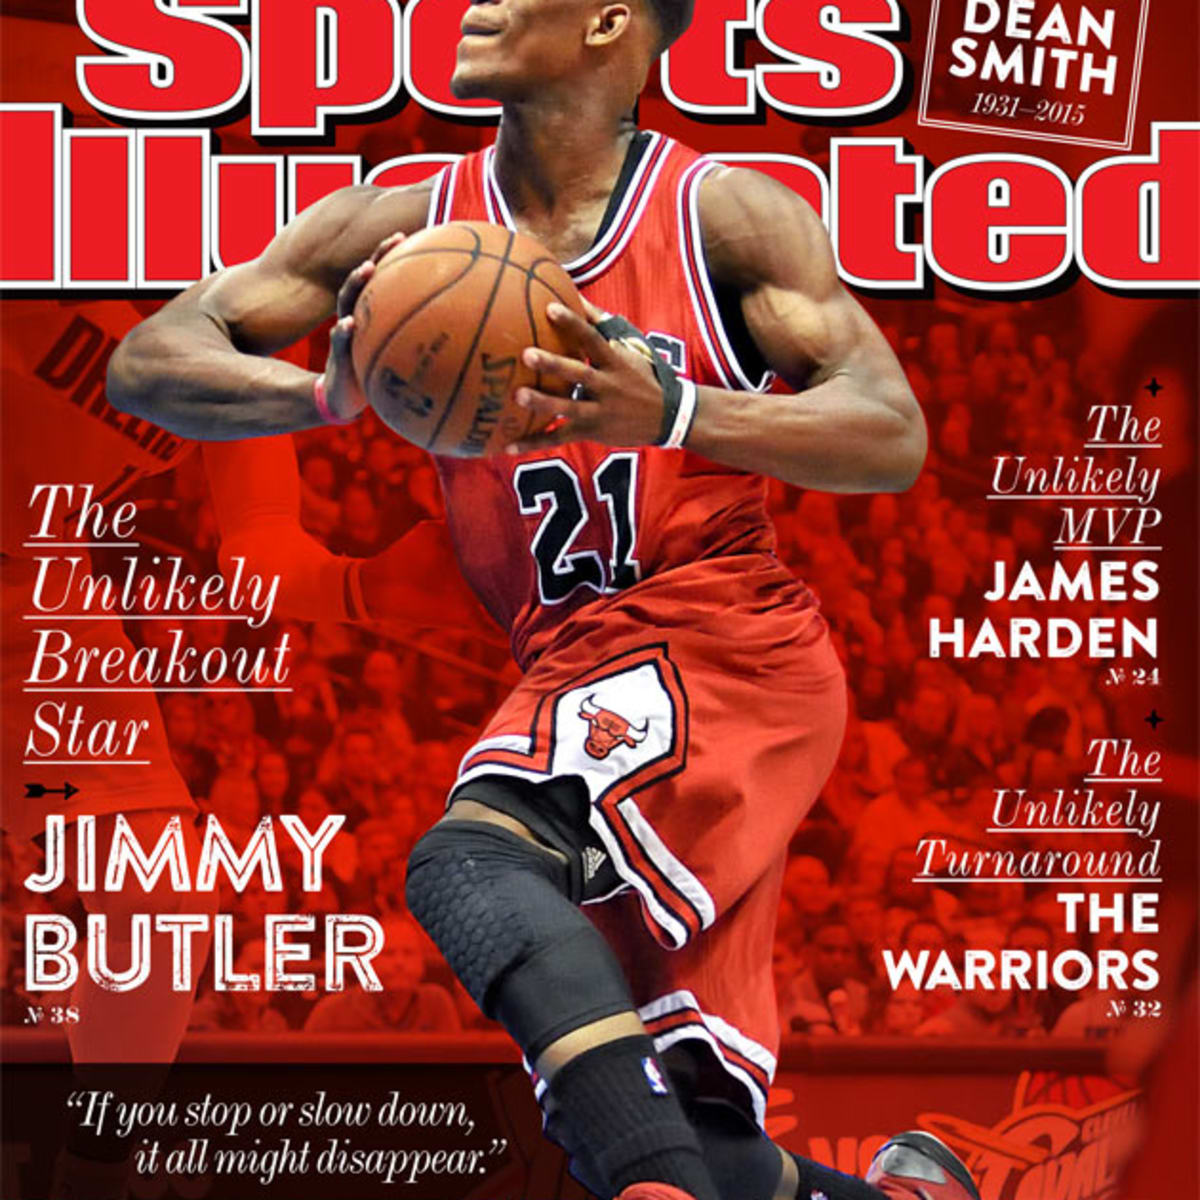 Tomball High's Jimmy Butler leads Miami Heat to NBA Finals